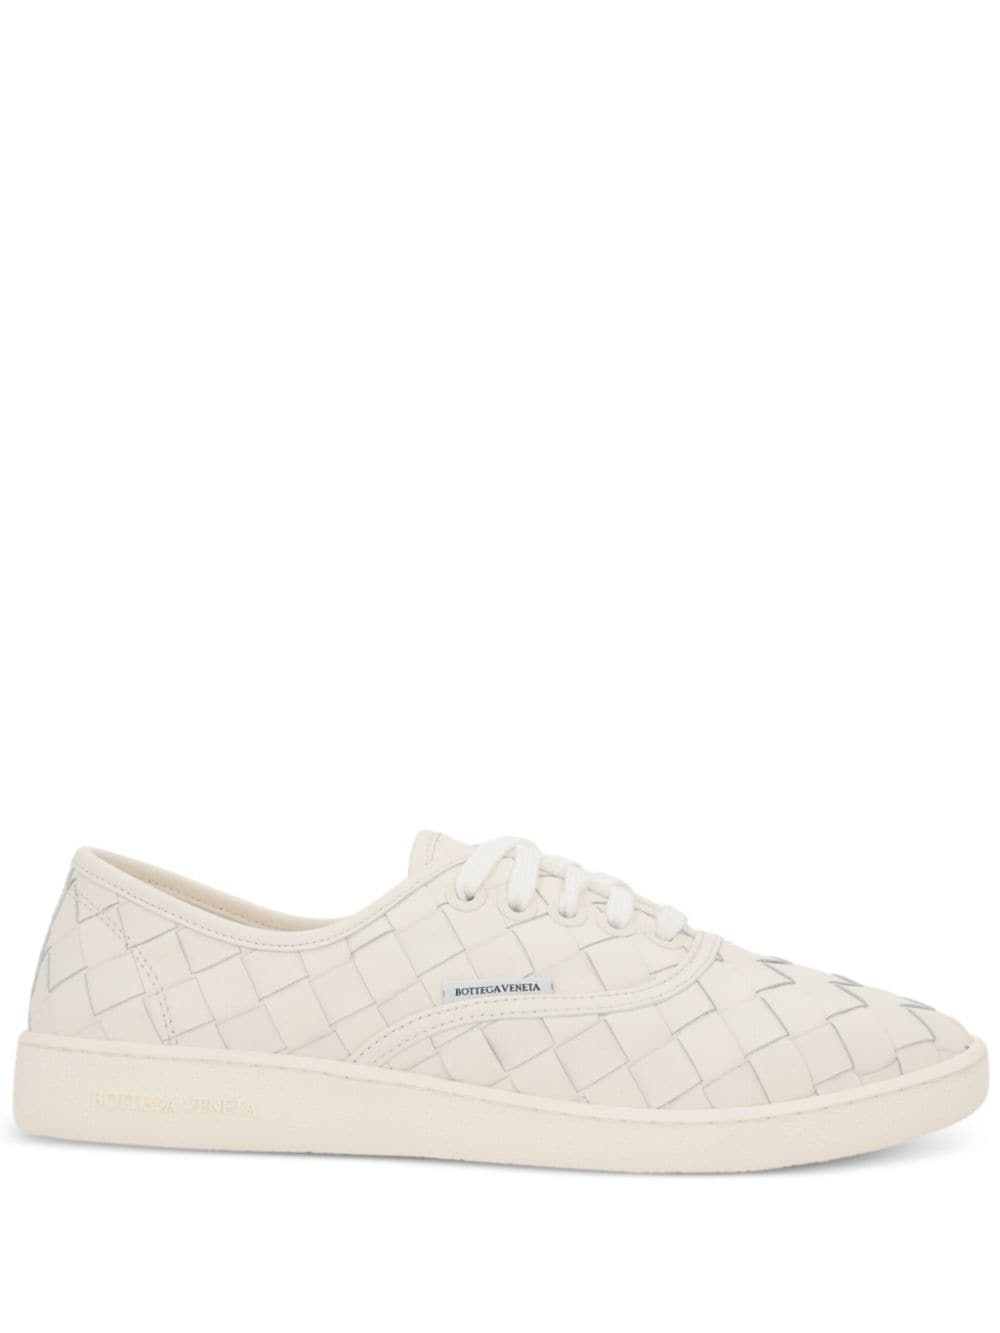 interwoven leather sneakers - 1